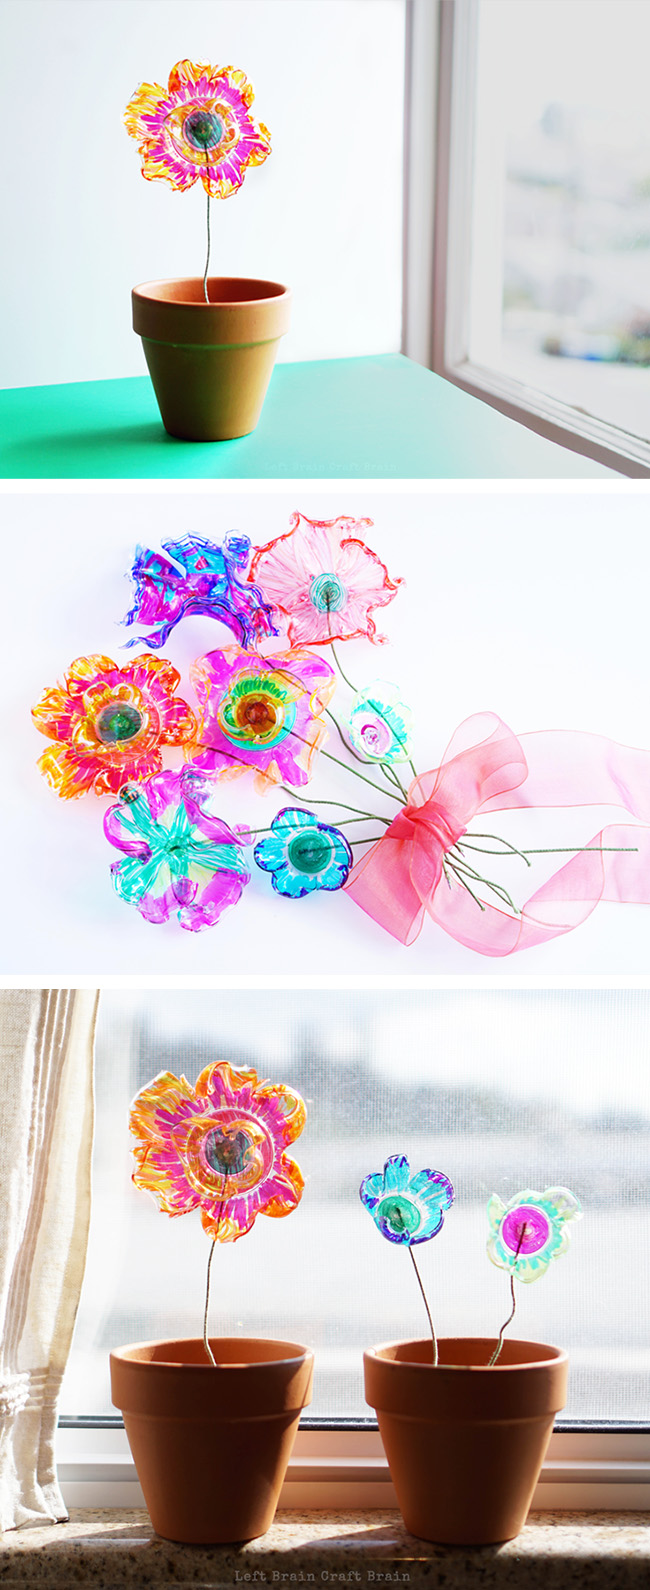 The magic of science makes these recycled plastic flowers beautiful. It's a great STEM / STEAM project for kids.